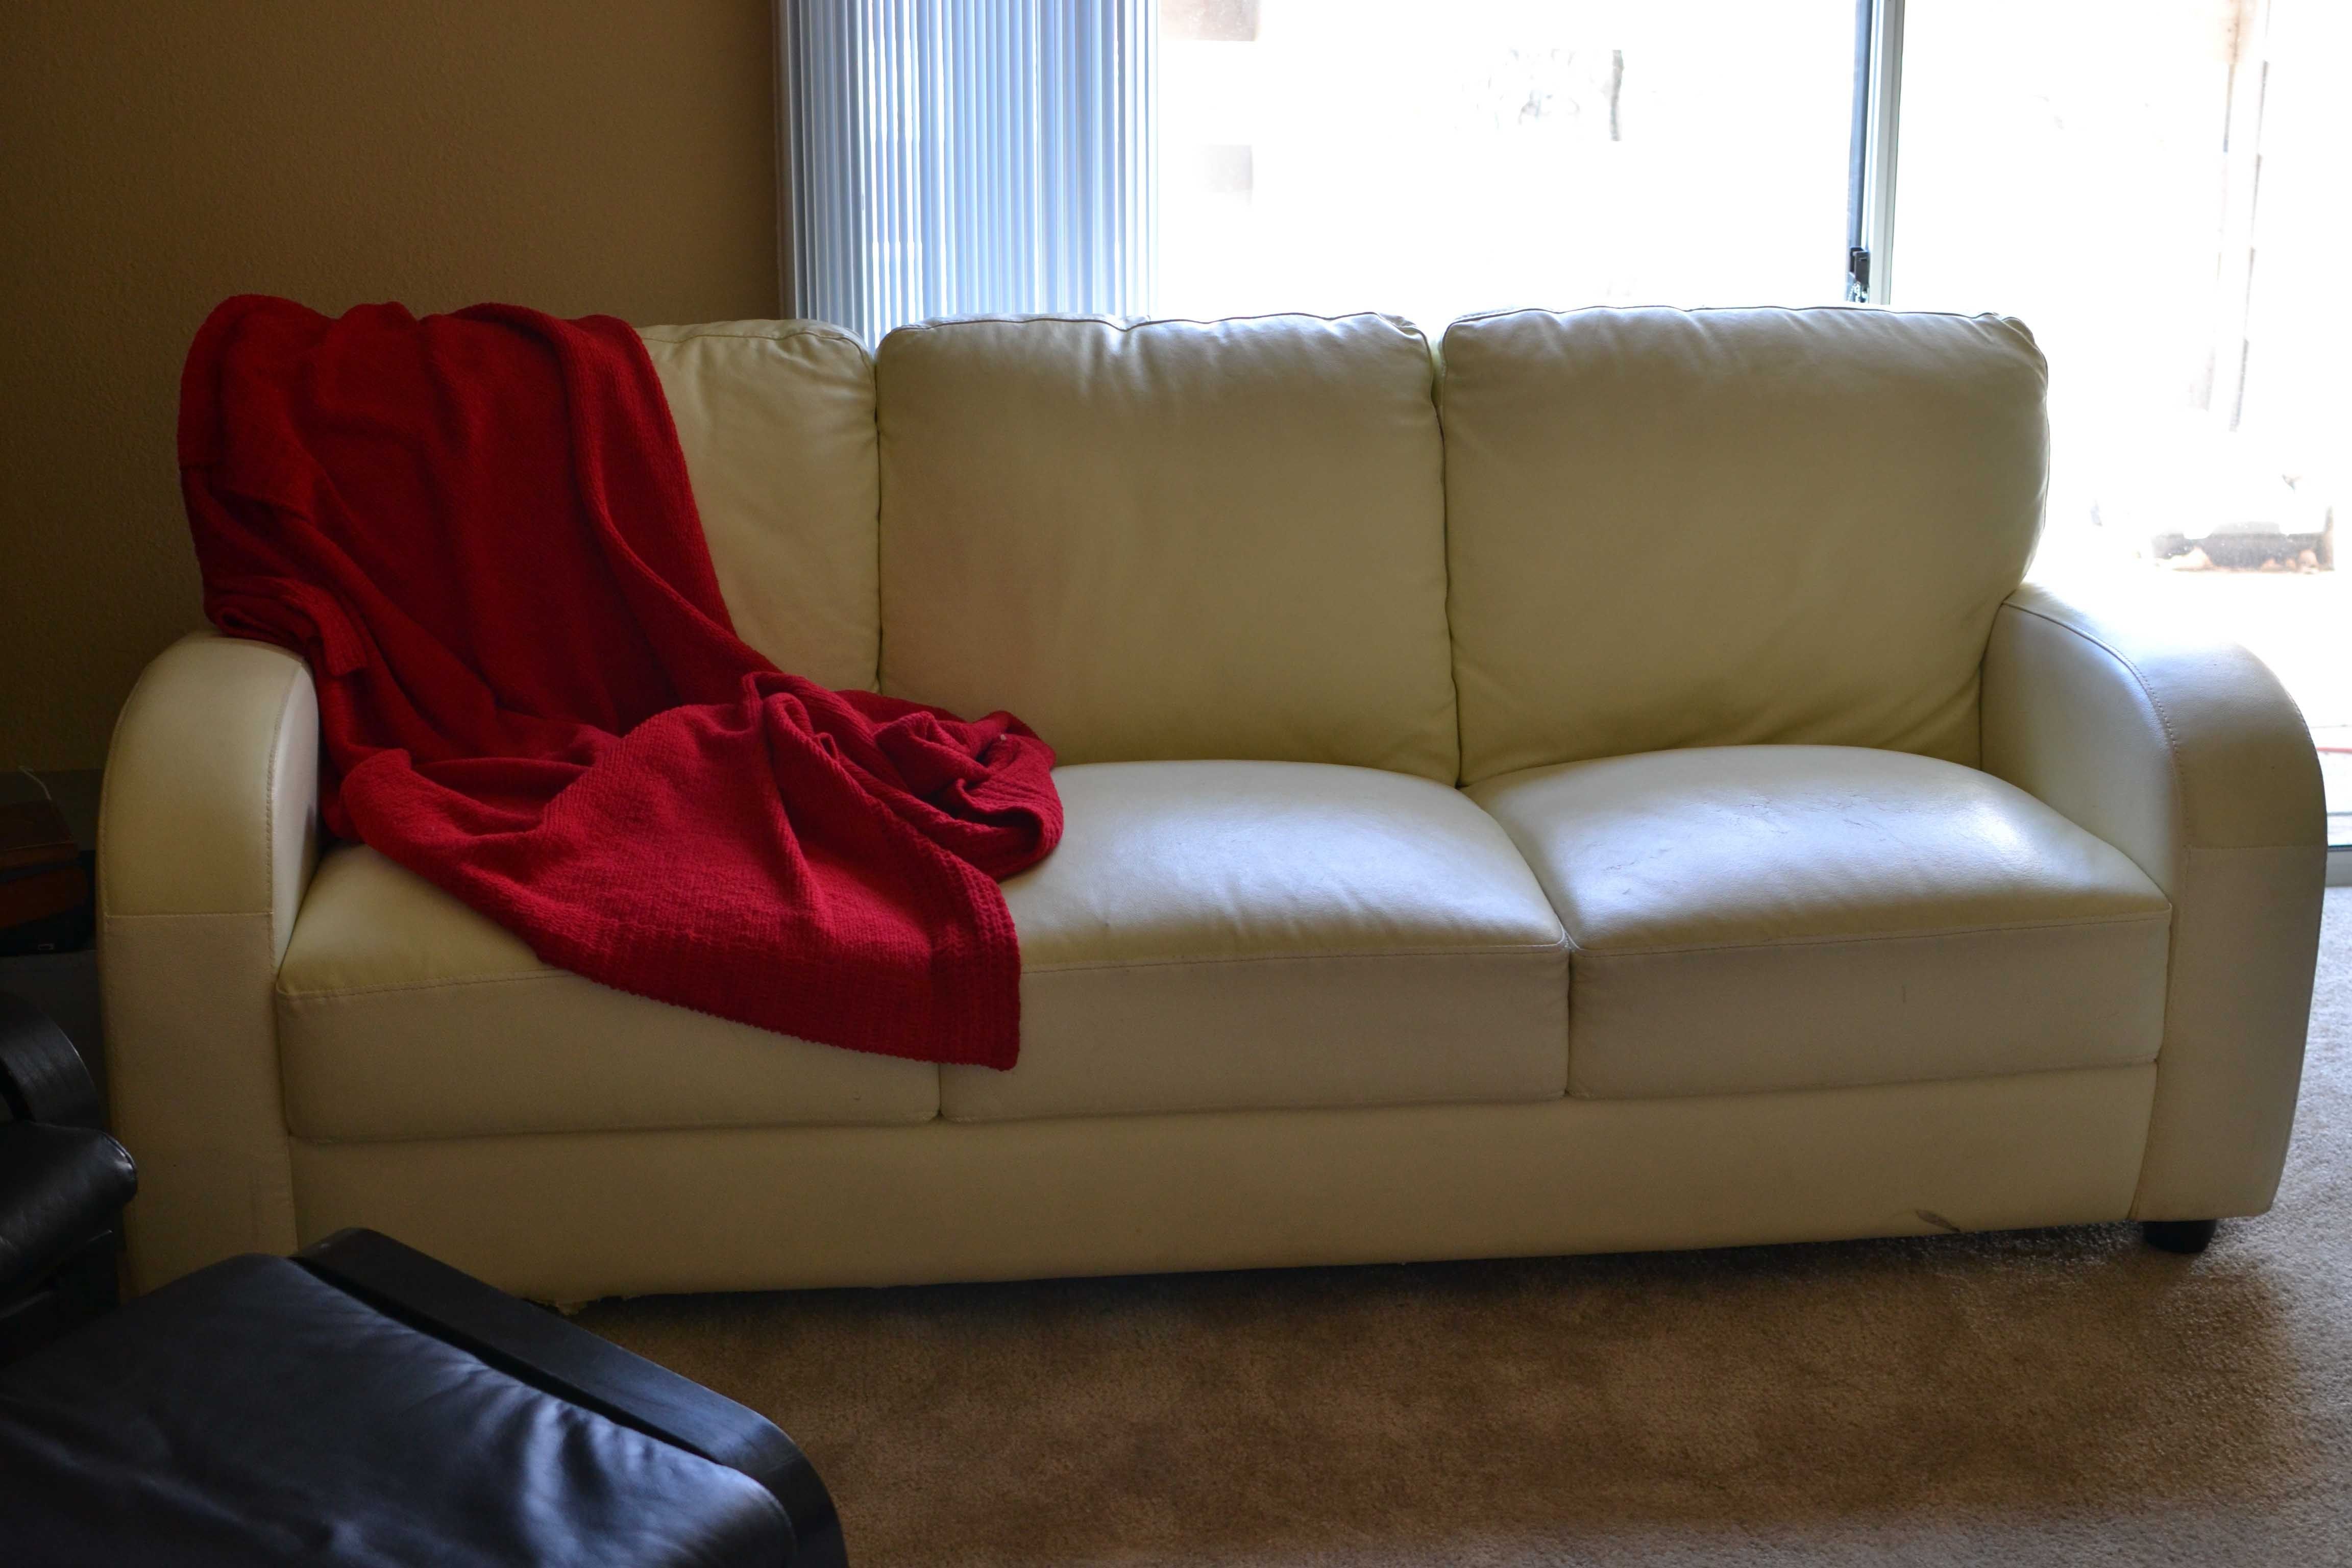 Popular Craigslist Leather Sofas Inside Amazing Leather Couch Craigslist 96 About Remodel Sofas And (View 2 of 20)